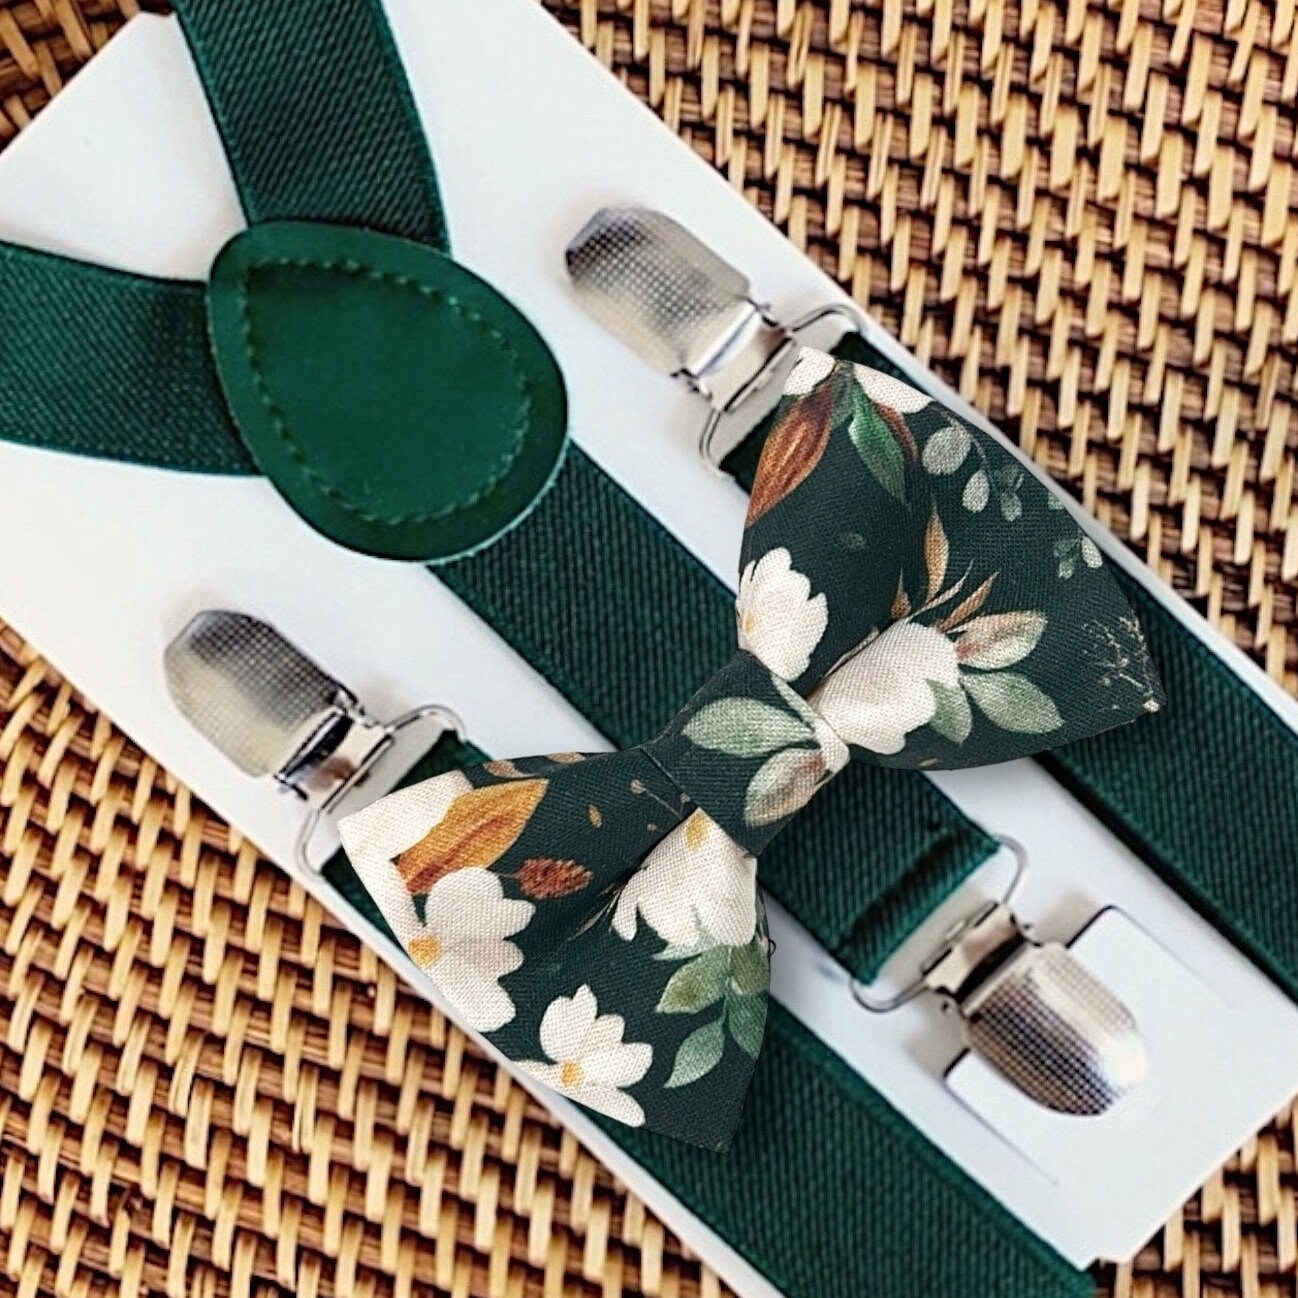 Emerald Green Floral Bow Tie, Green Floral Tie for Green Weddings, Bowties Ring Bearer Gift and Groomsmen, Rustic Boho Wedding Accessories